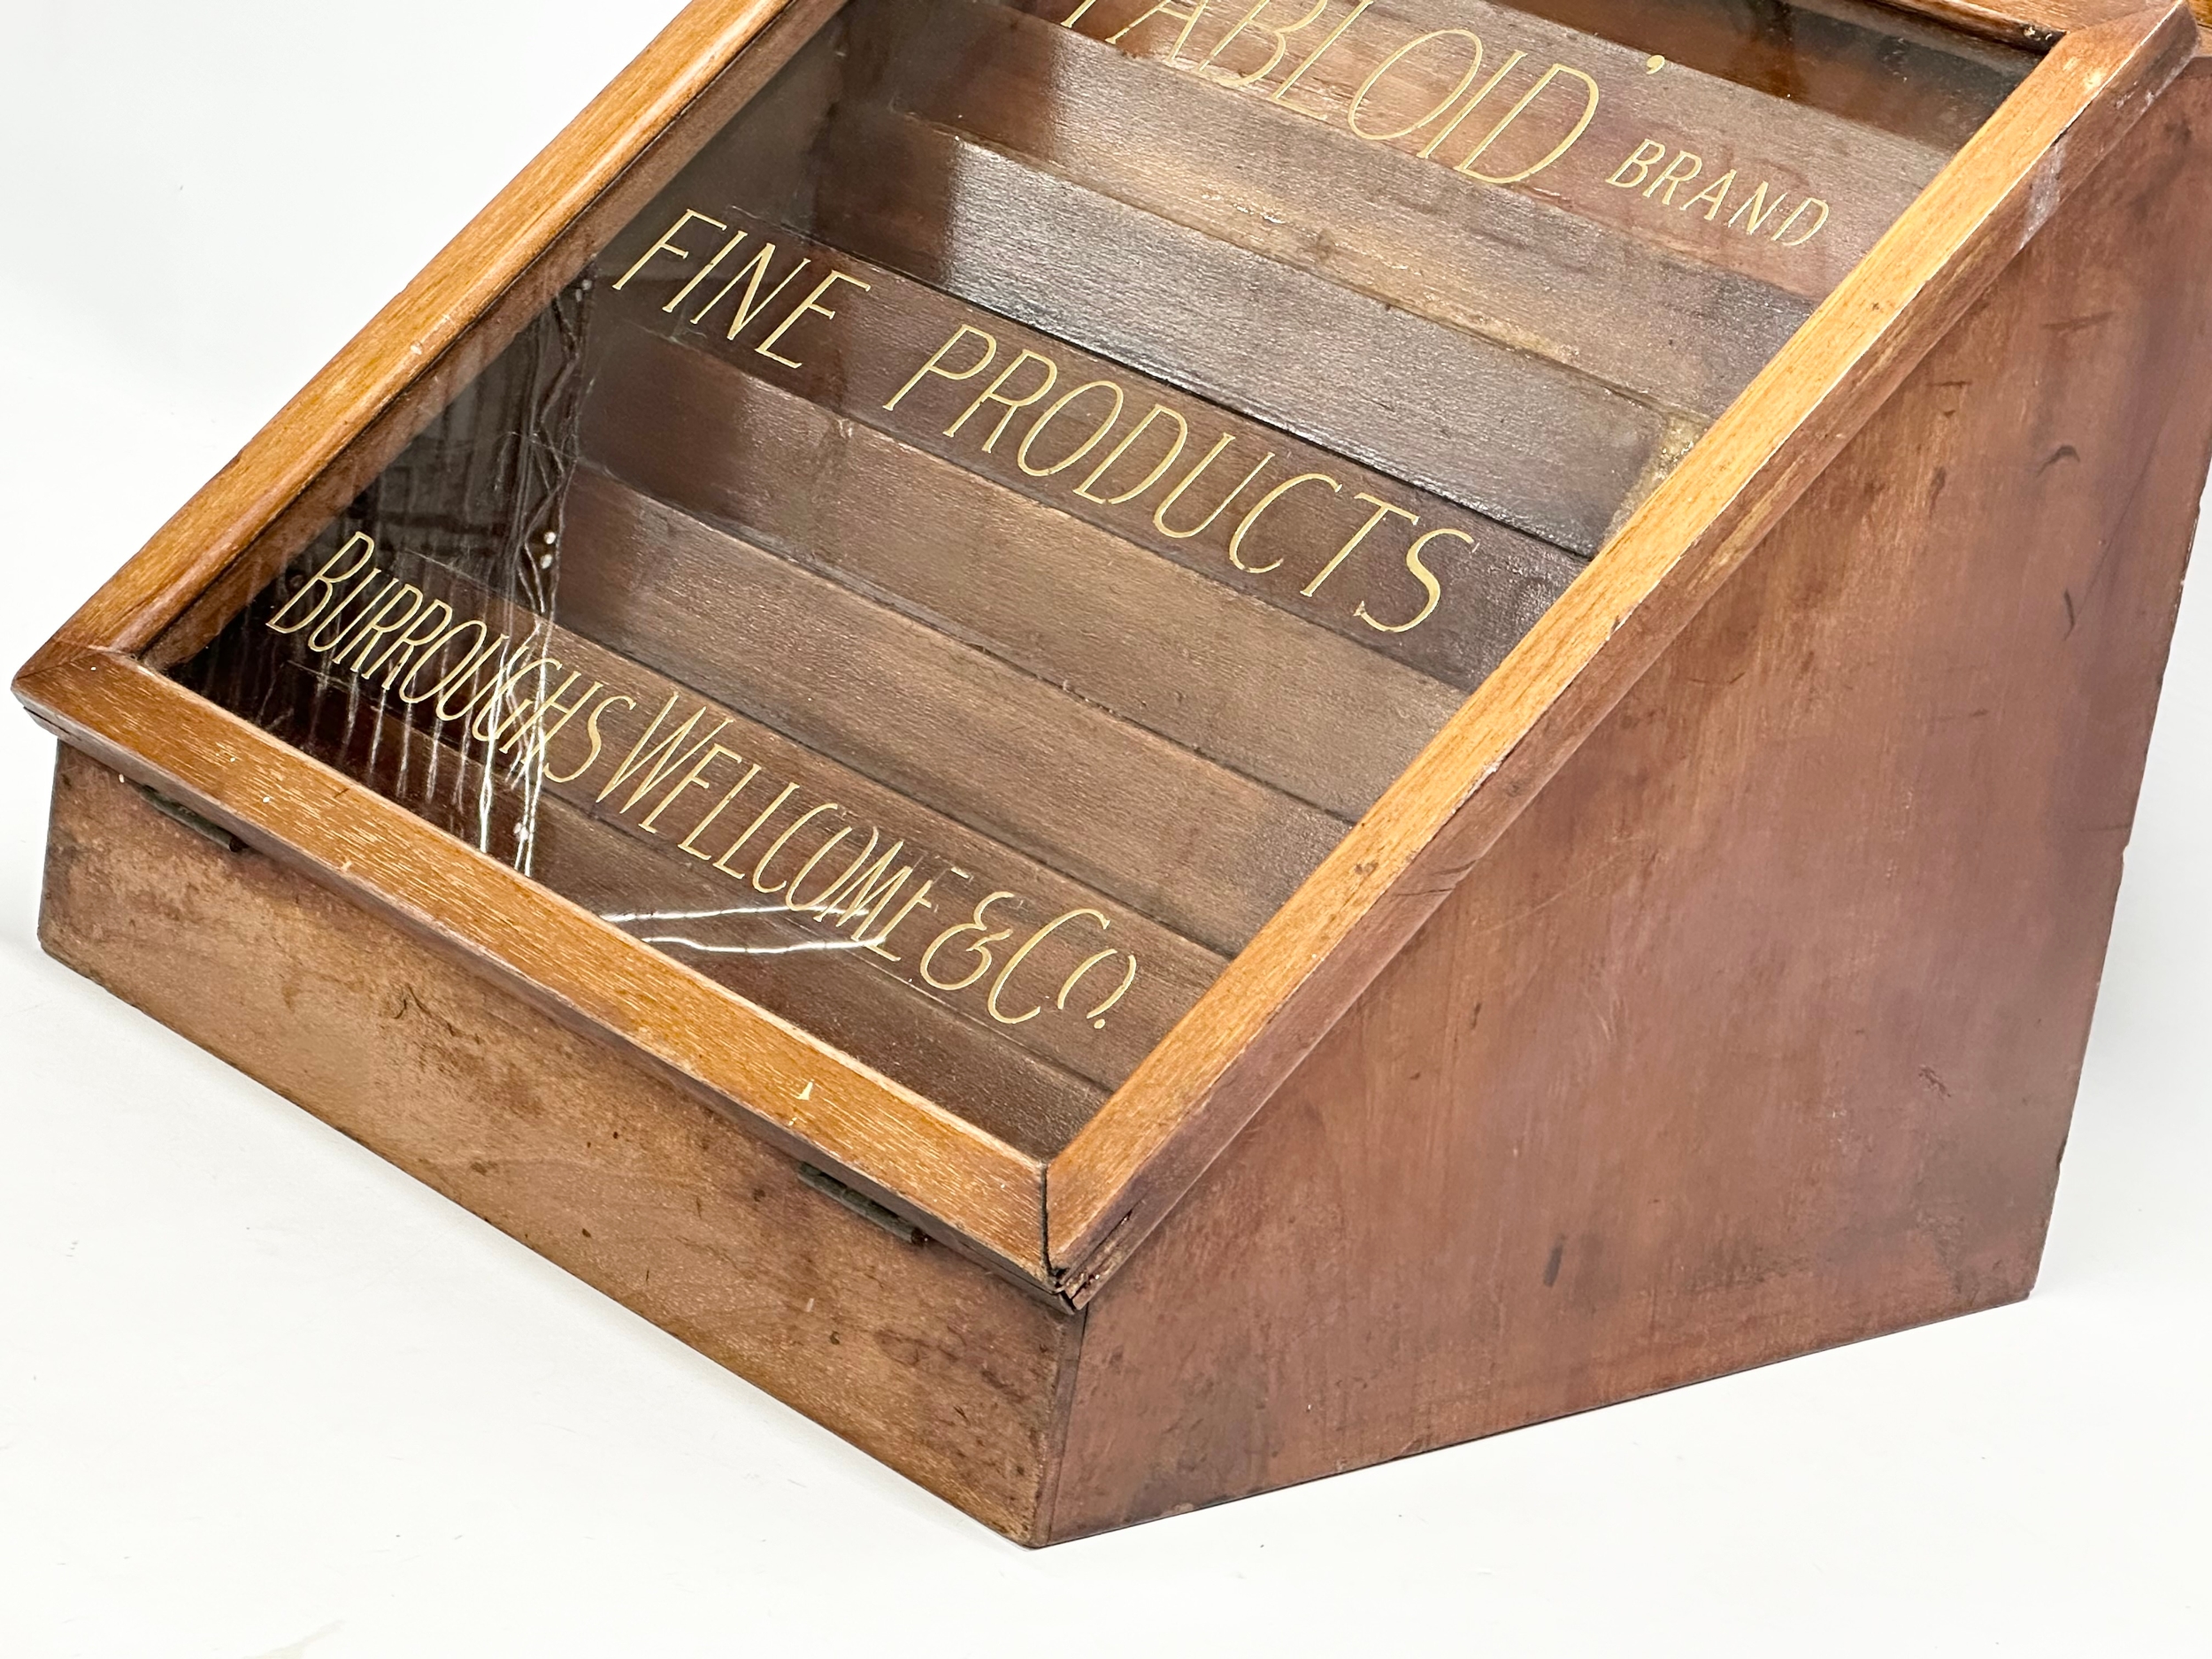 An early 20th century countertop pharmacists display case by Burroughs Wellcome & Co. 40x35x39.5cm - Image 2 of 7